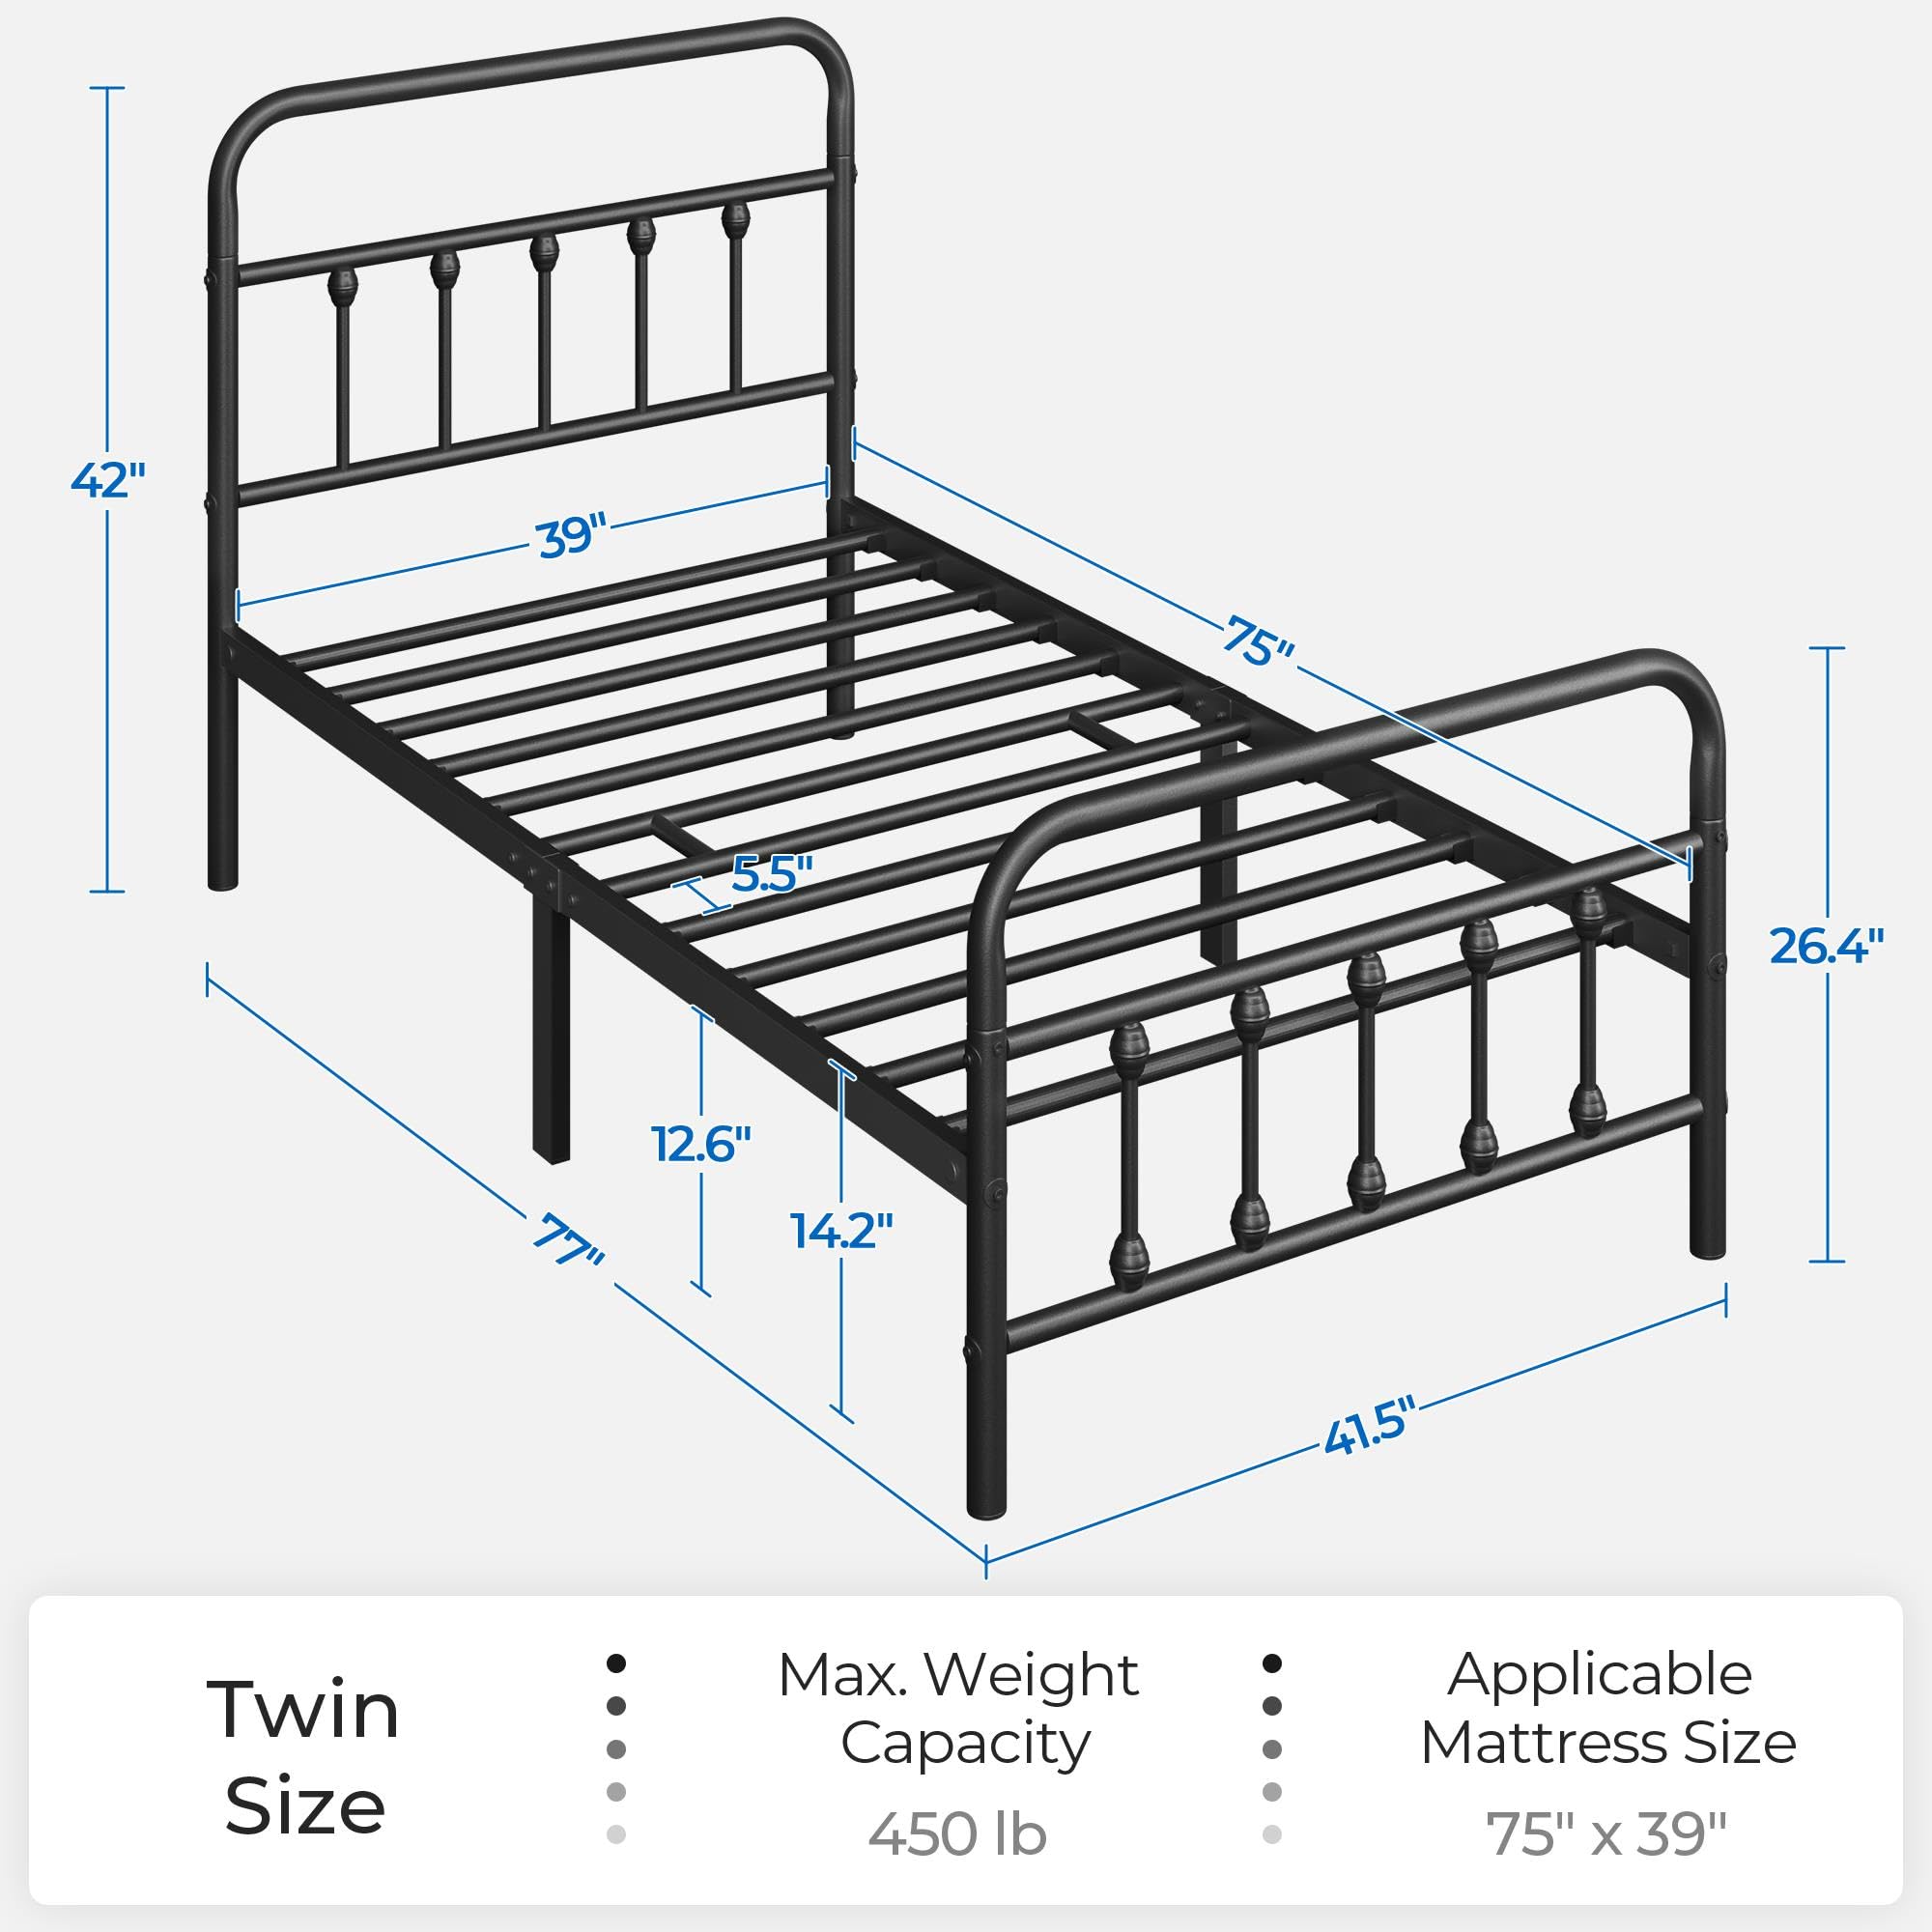 Yaheetech Classic Metal Platform Bed Frame Mattress Foundation with Victorian Style Iron-Art Headboard/Footboard/Under Bed Storage, No Box Spring Needed, Twin Size, Black